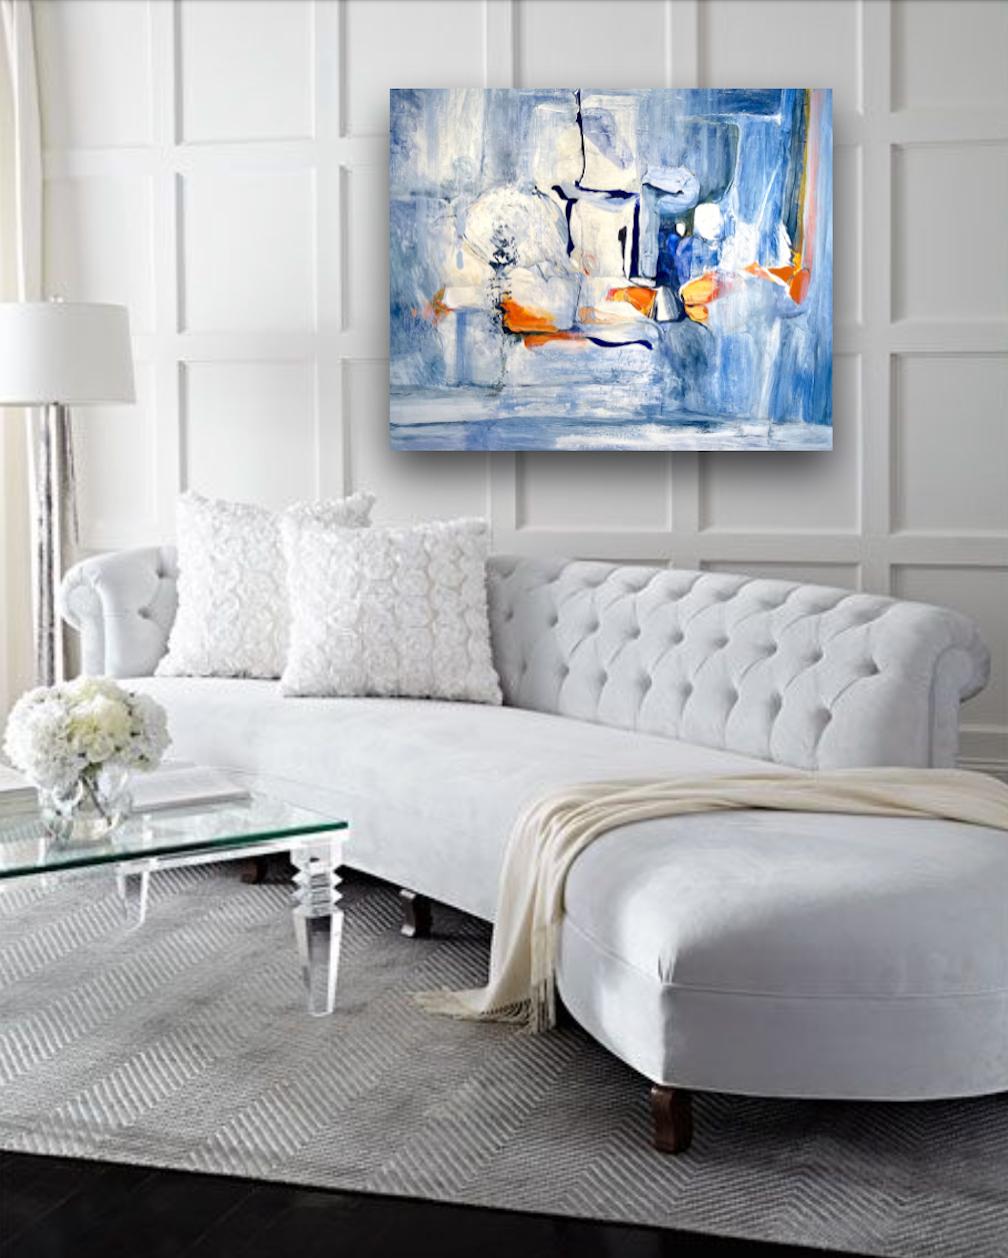 FAVORABLE CONDITIONS - Large abstract painting in marigold, white and blue For Sale 6